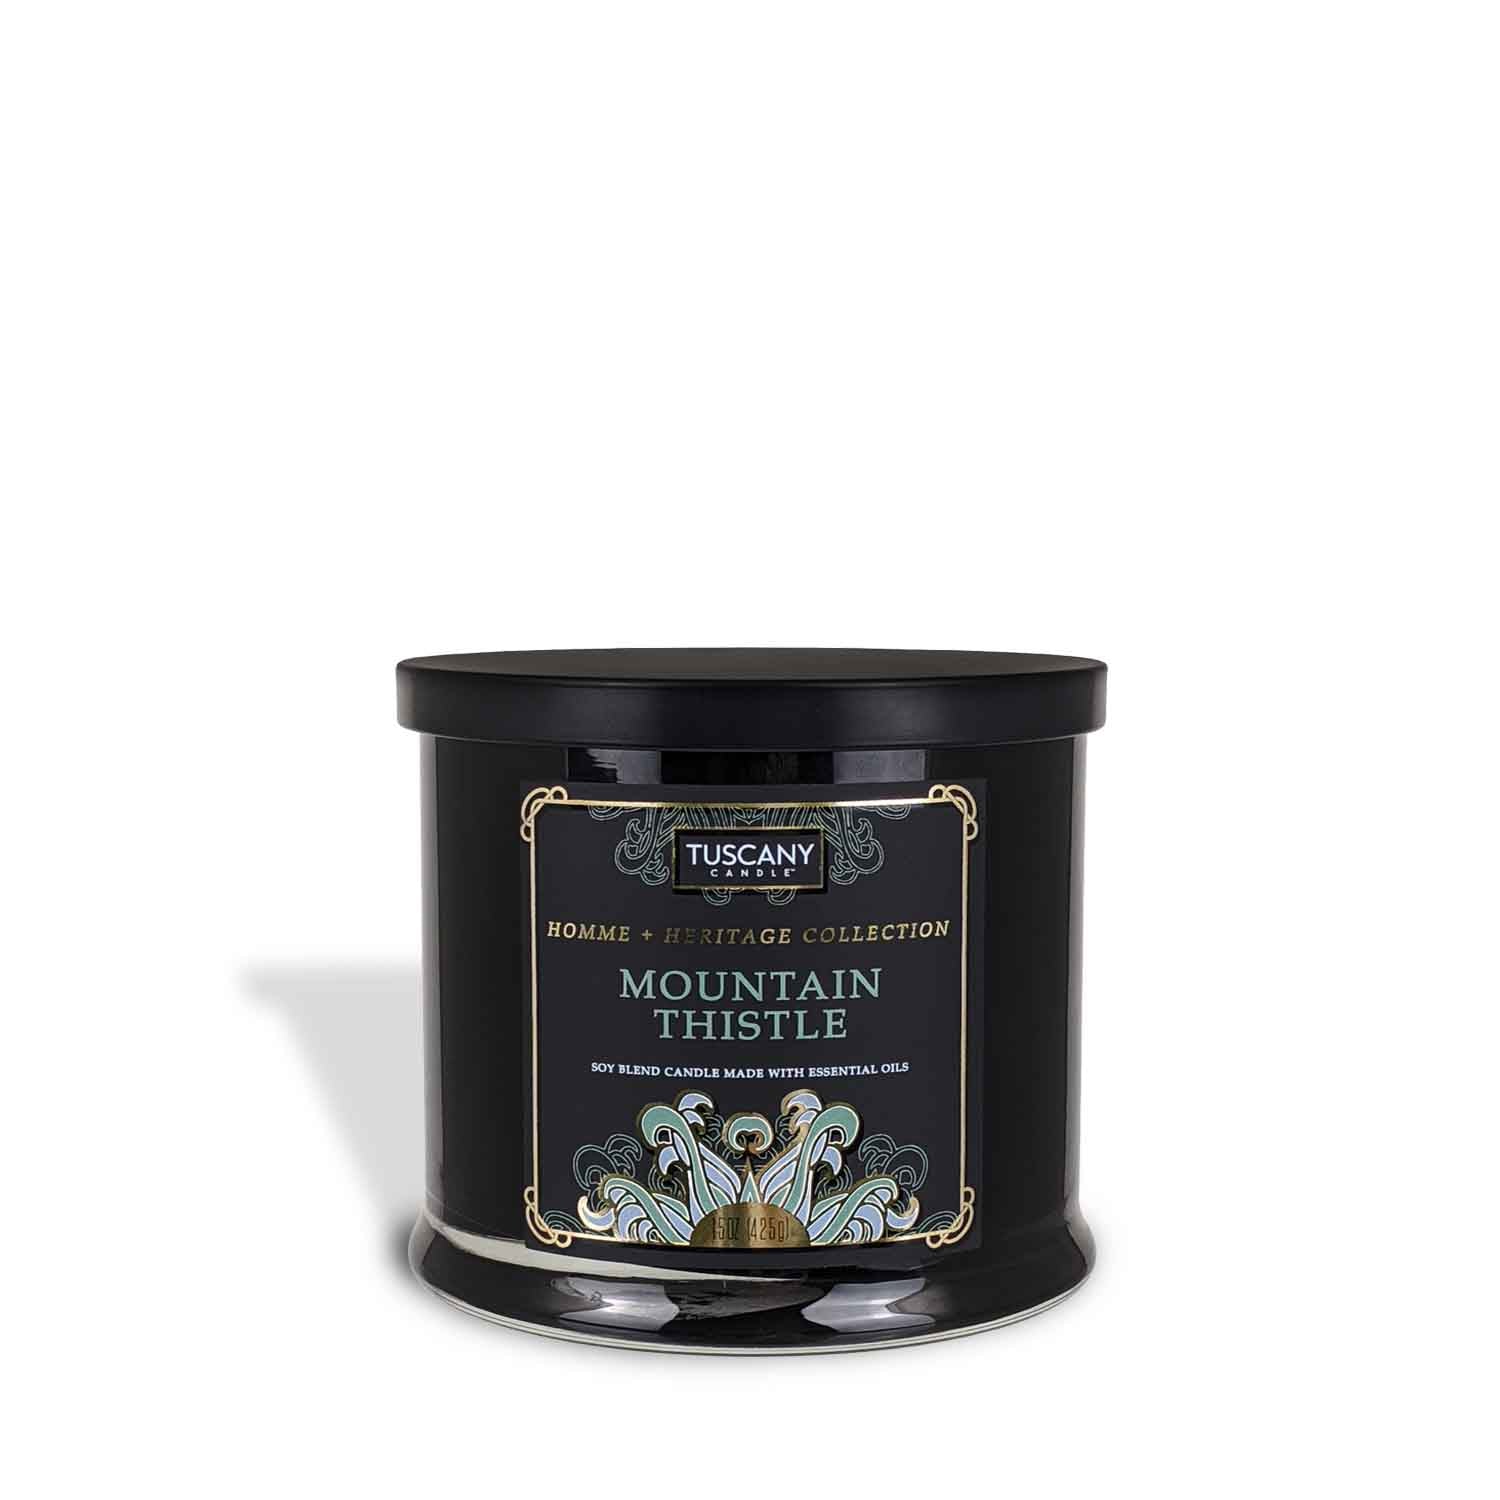 A black tin Mountain Thistle Scented Jar Candle (15 oz) – Homme + Heritage Collection by Tuscany Candle with the words "mountain white" on it, featuring essential oils from our fragrances collection.